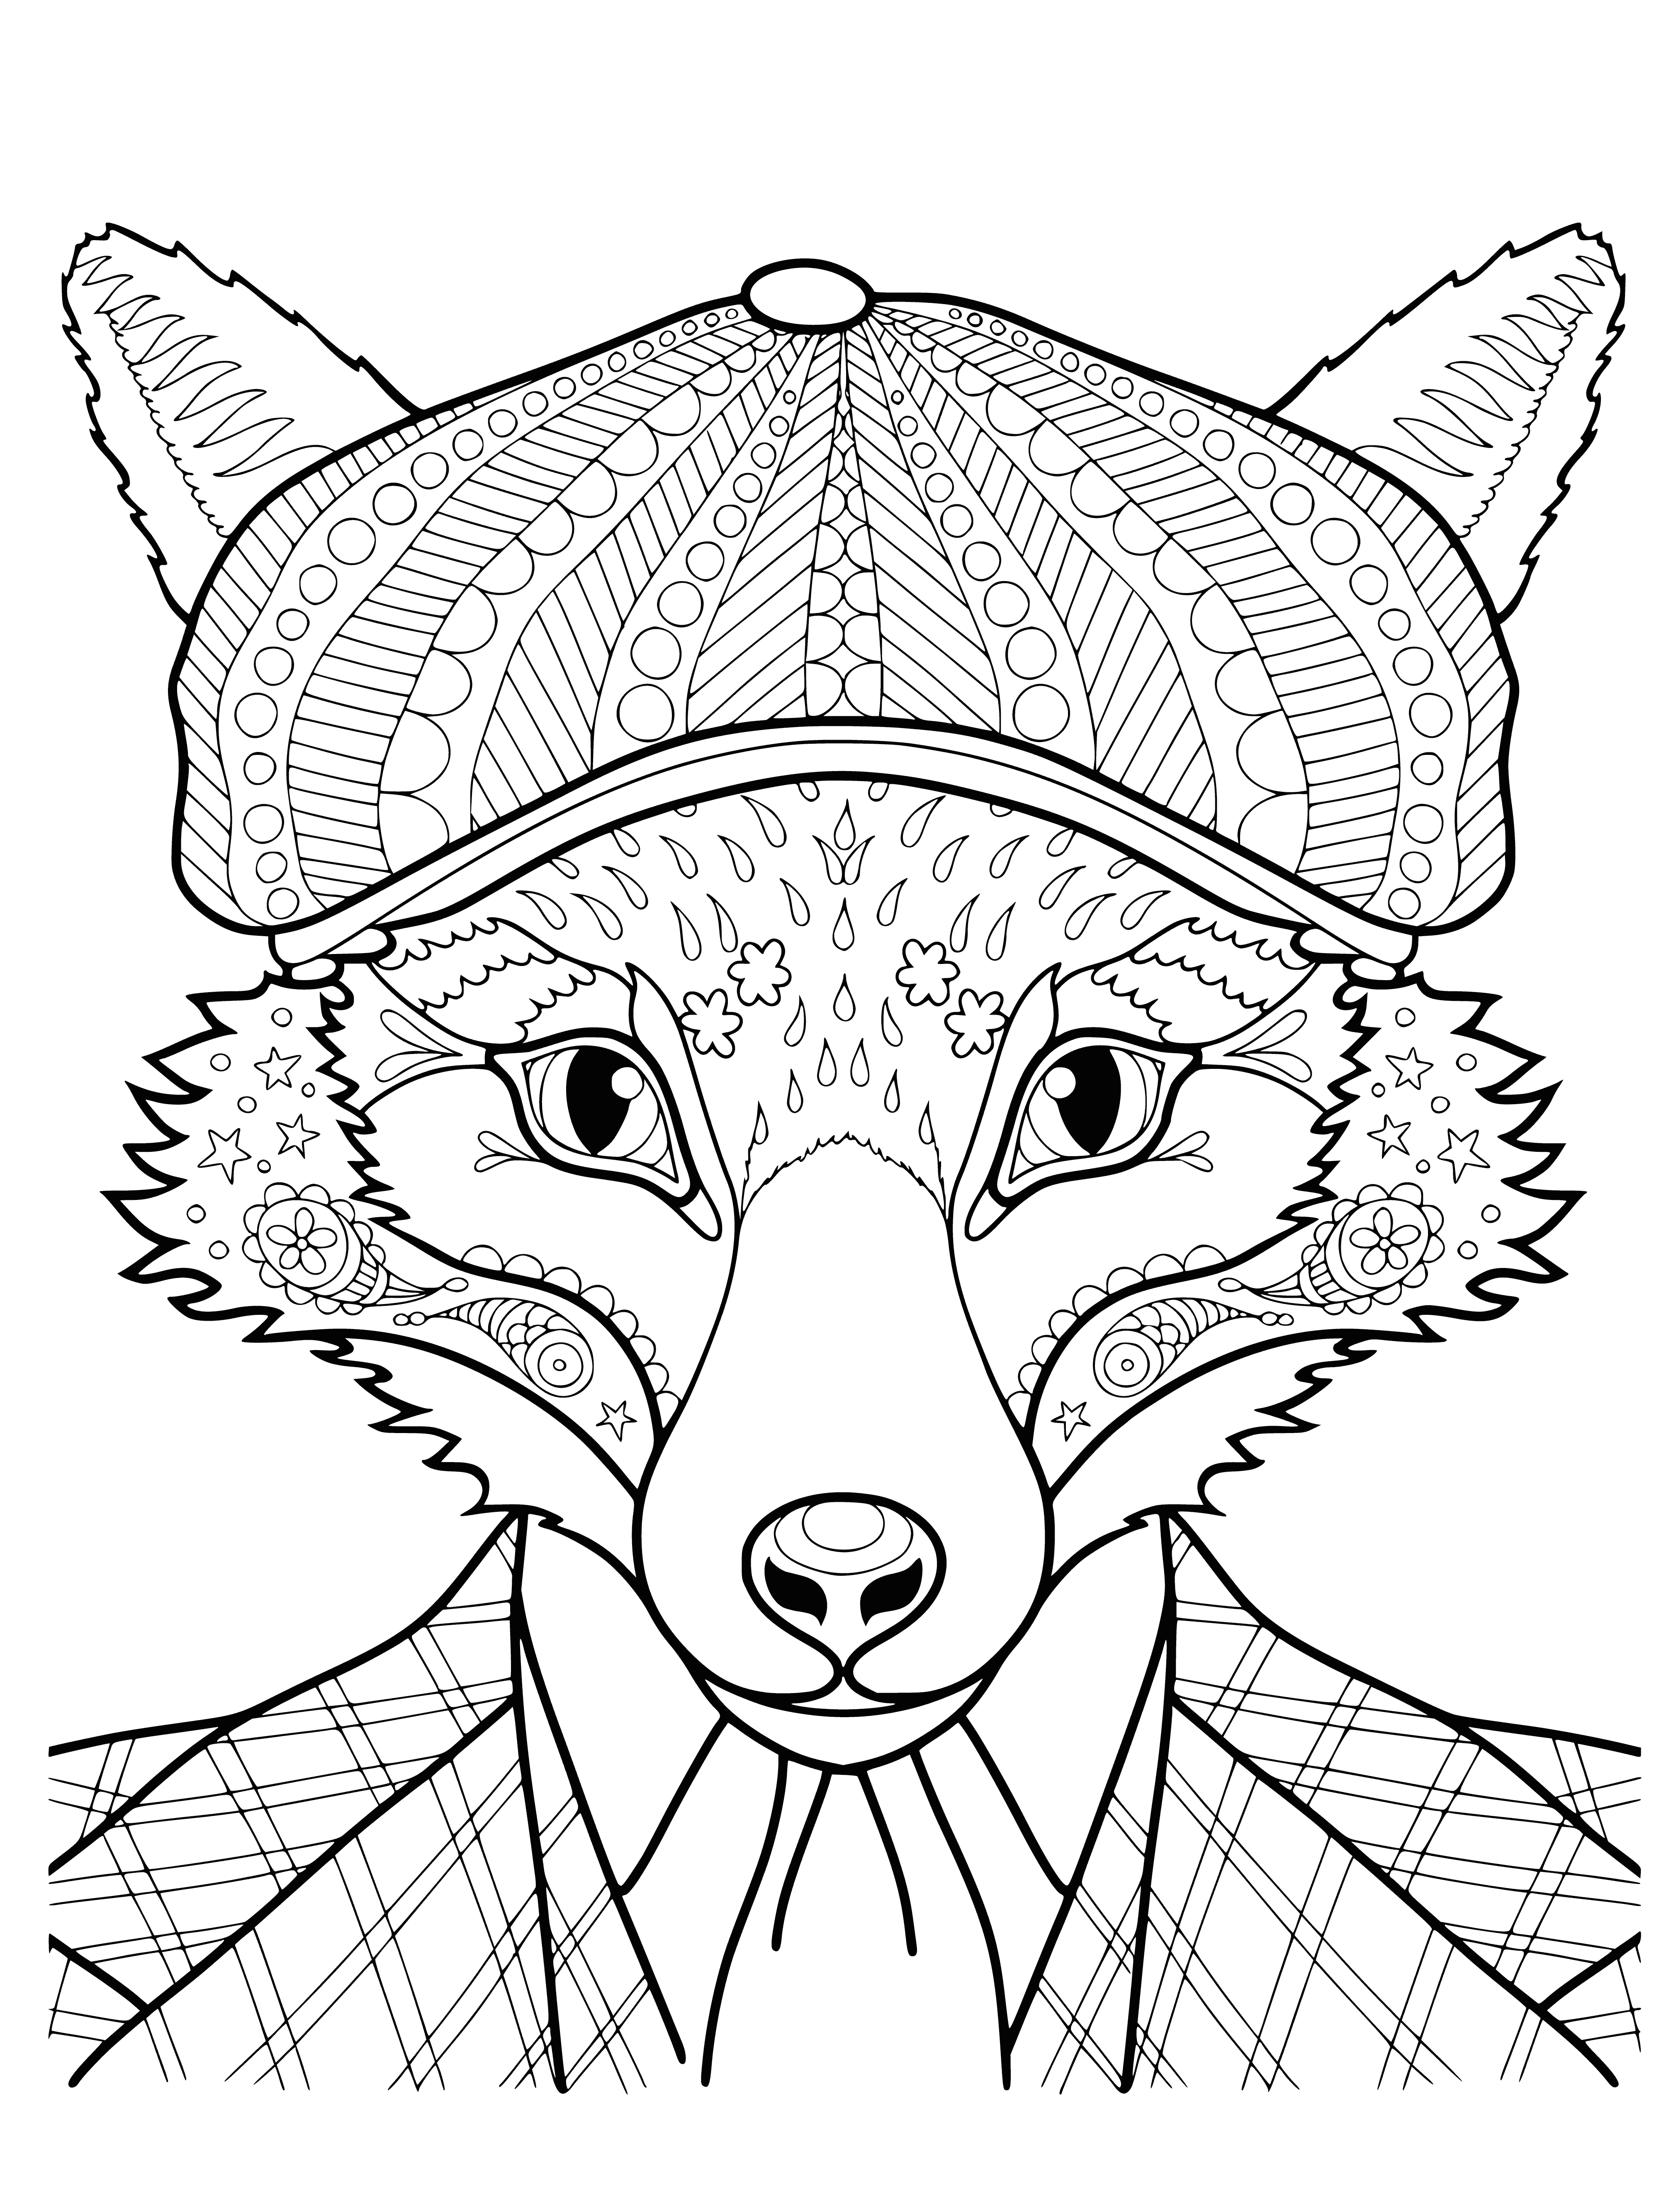 coloring page: Mrs. Fox stands in a field of grass, a forest behind her. She has red and white fur, a long snout and bushy tail.